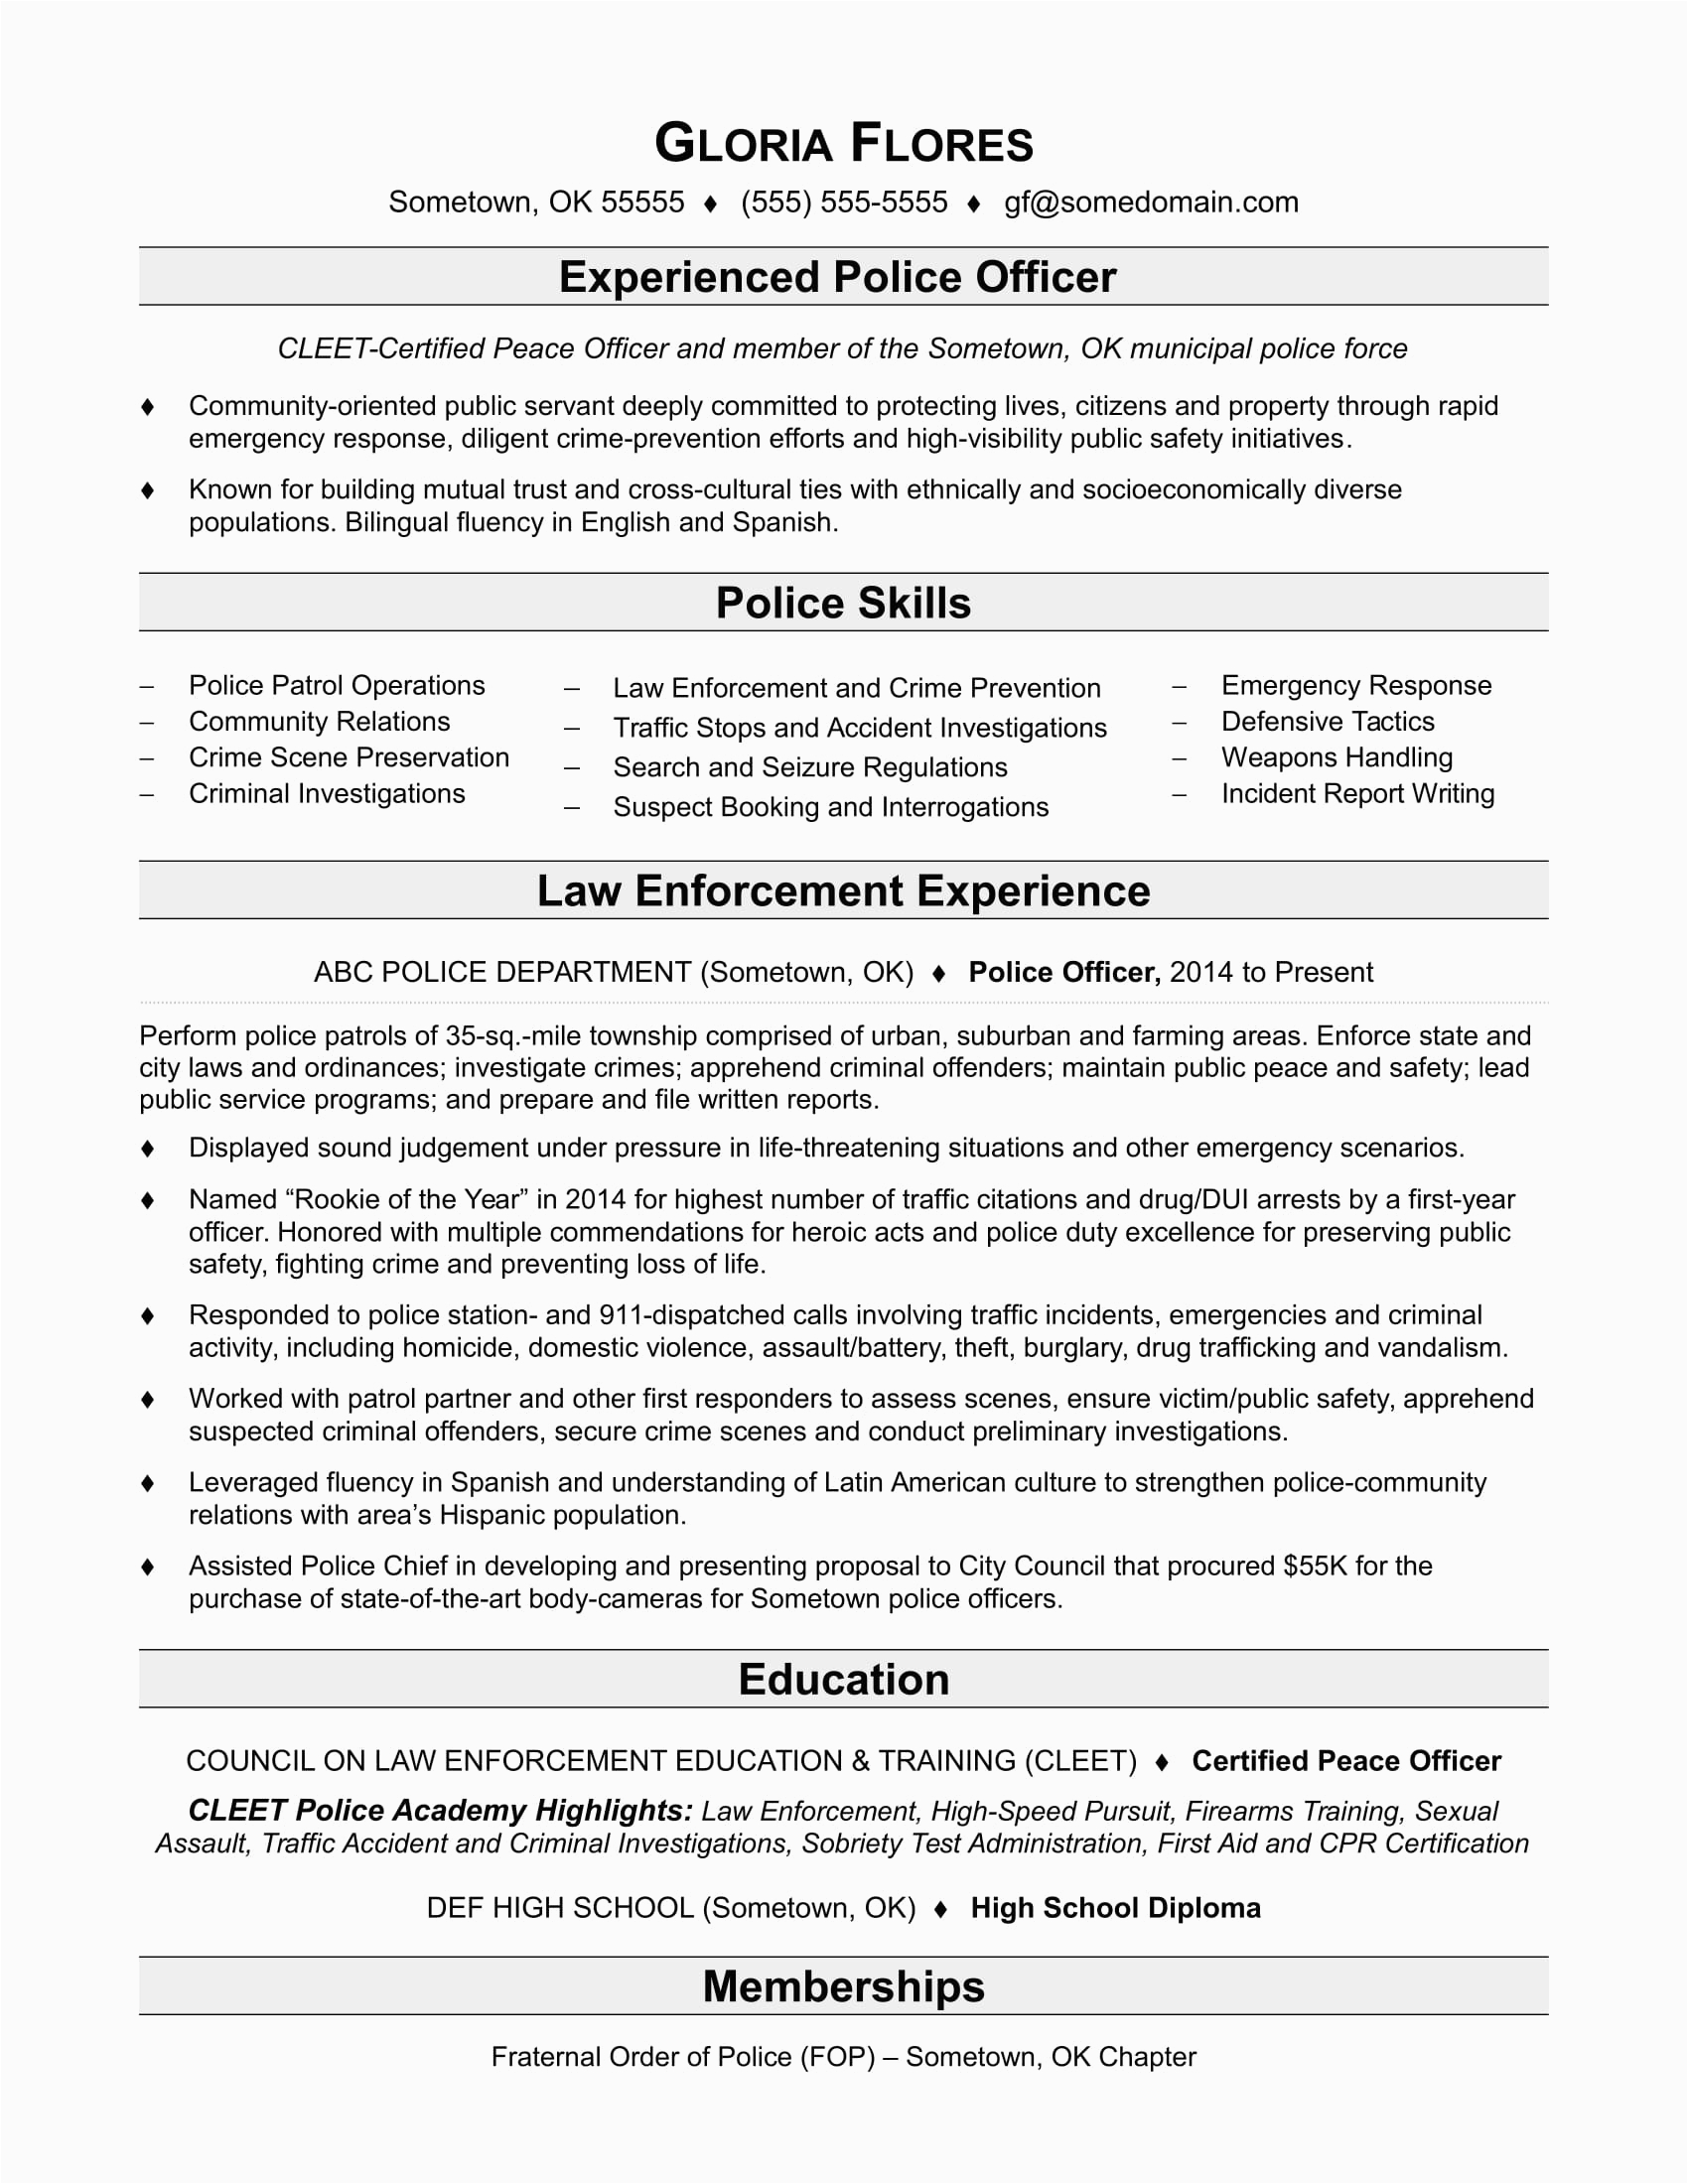 Sample Resume for Police Officer with No Experience Police Ficer Resume